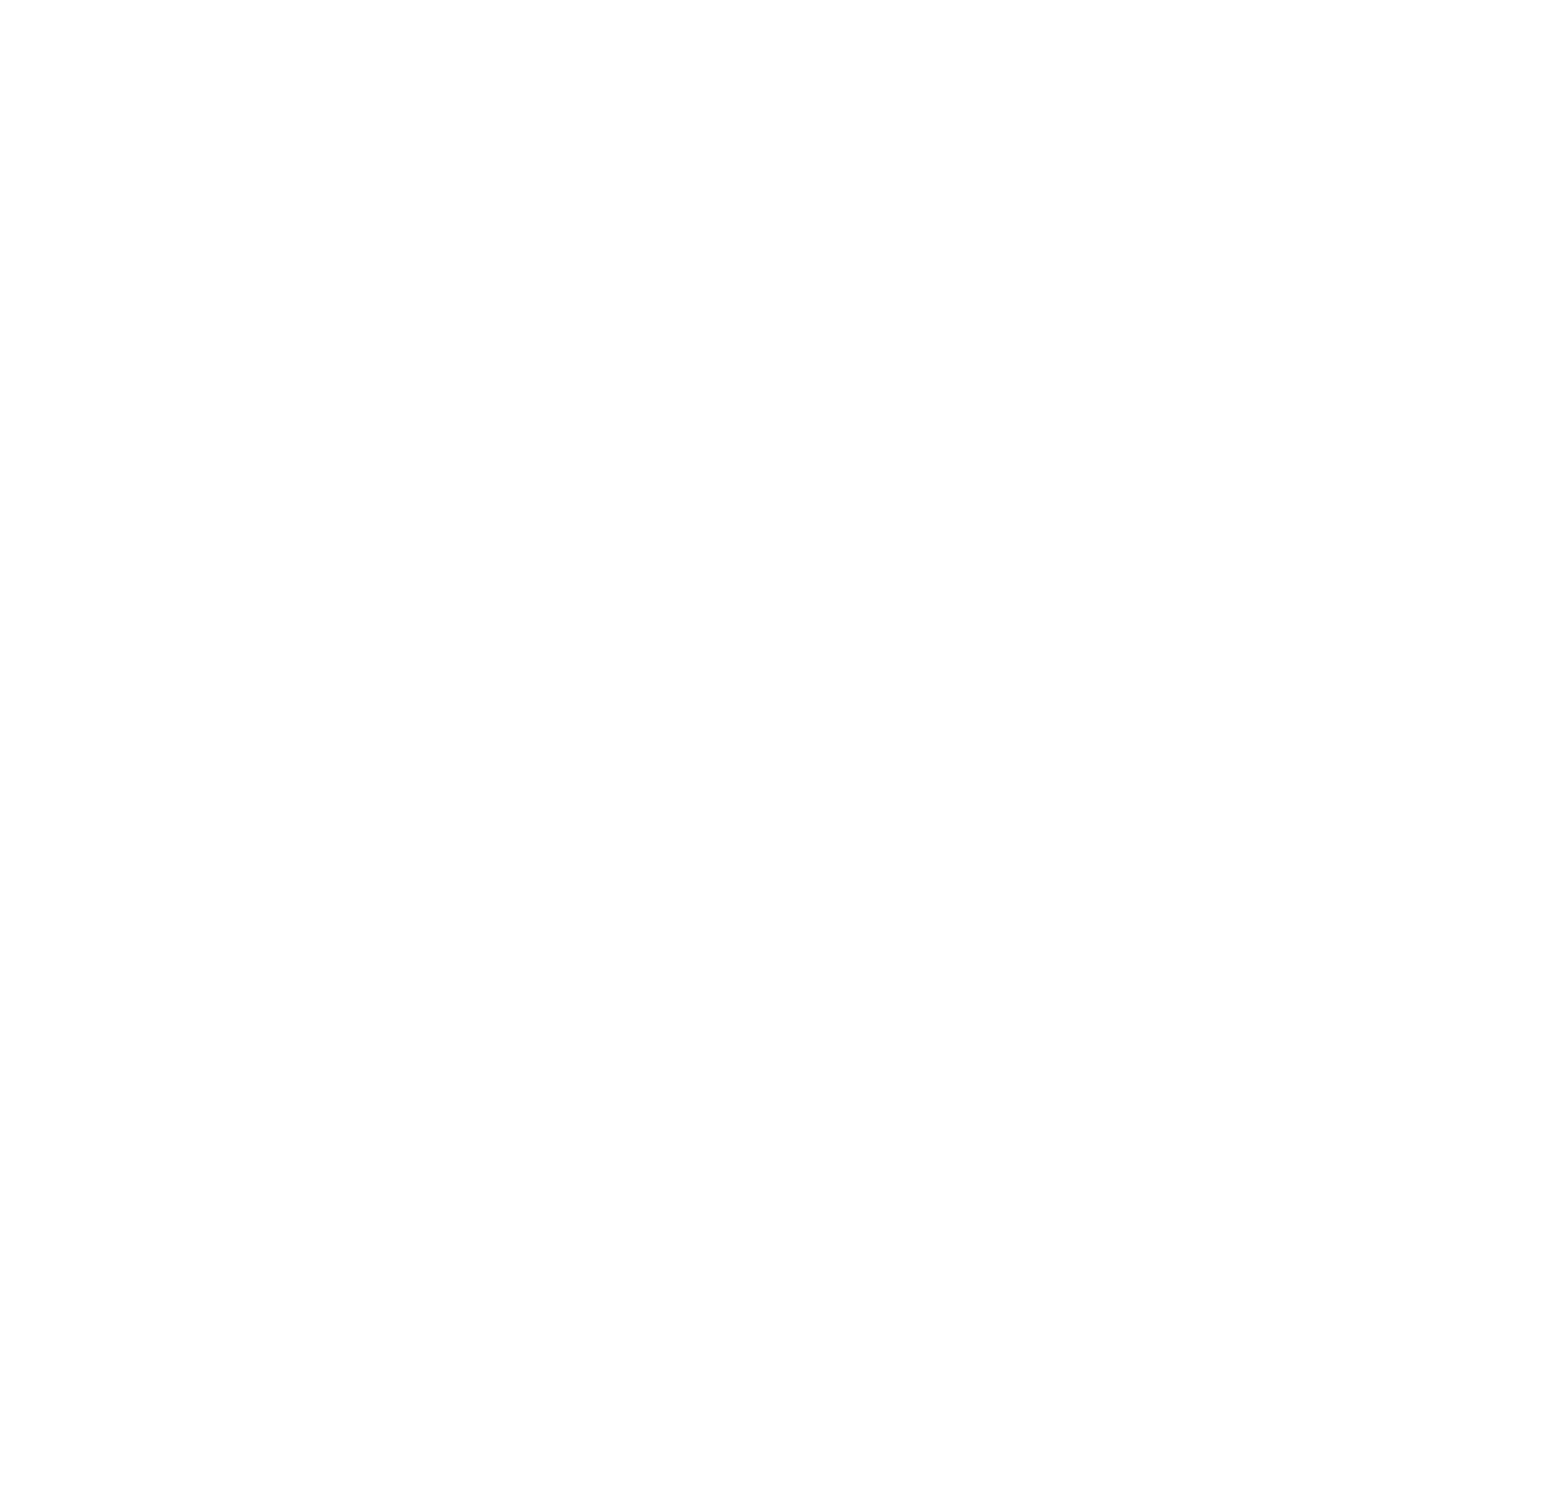 Stagwell logo for dark backgrounds (transparent PNG)